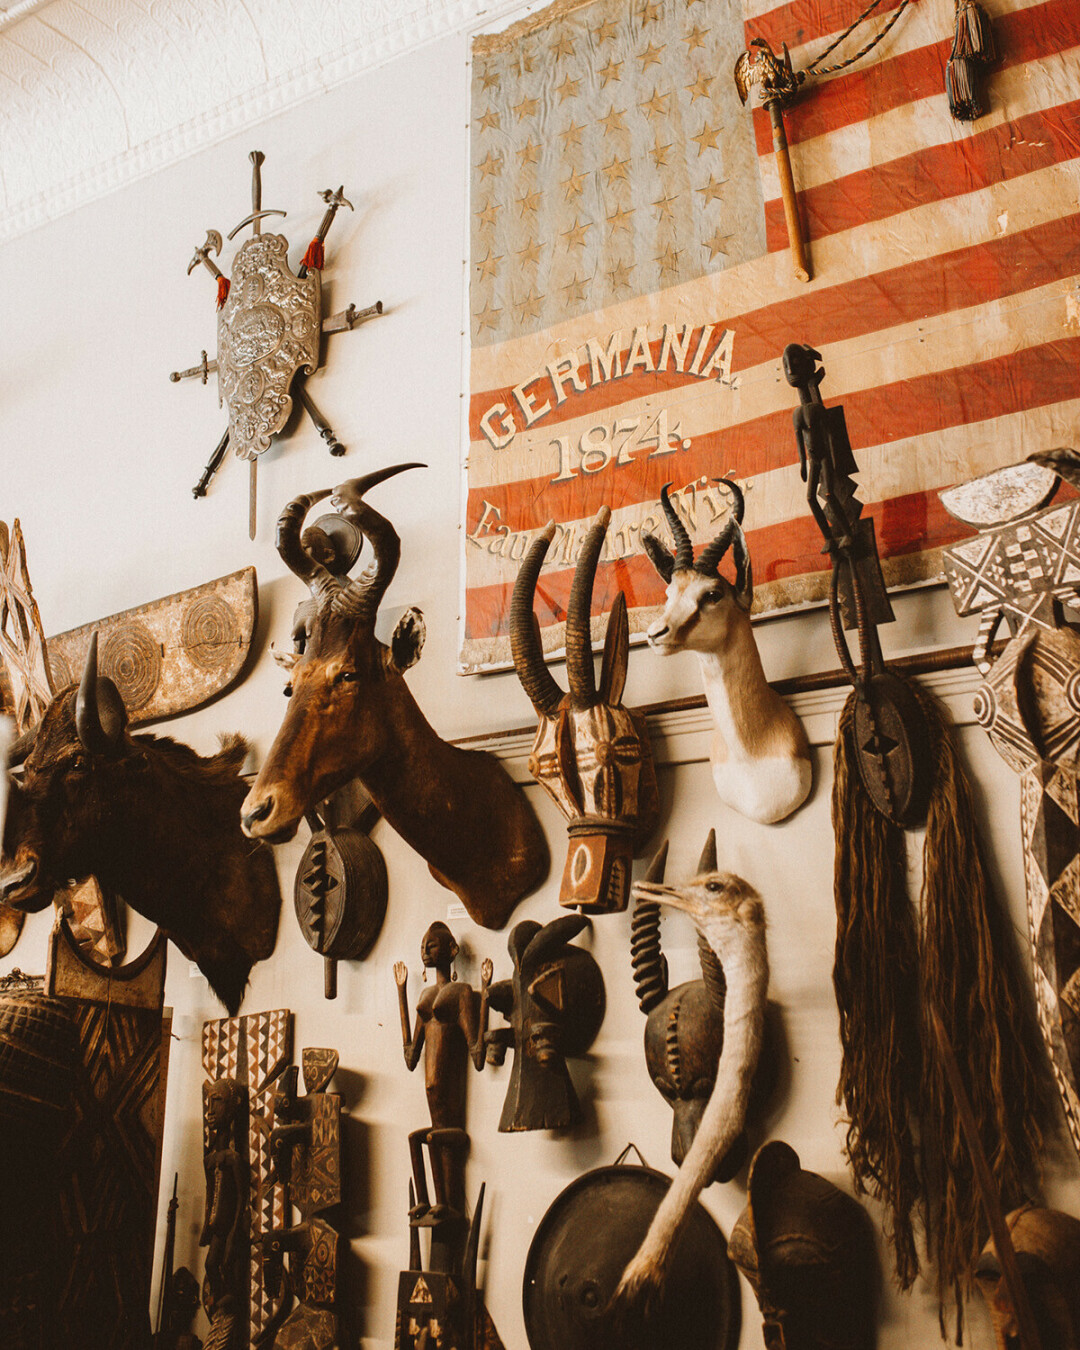 Among the countless curiosities in the Antique Emporium are taxidermied animal heads and a flag carried by a German-American regiment from Eau Claire in the Civil War. (Submitted photo)